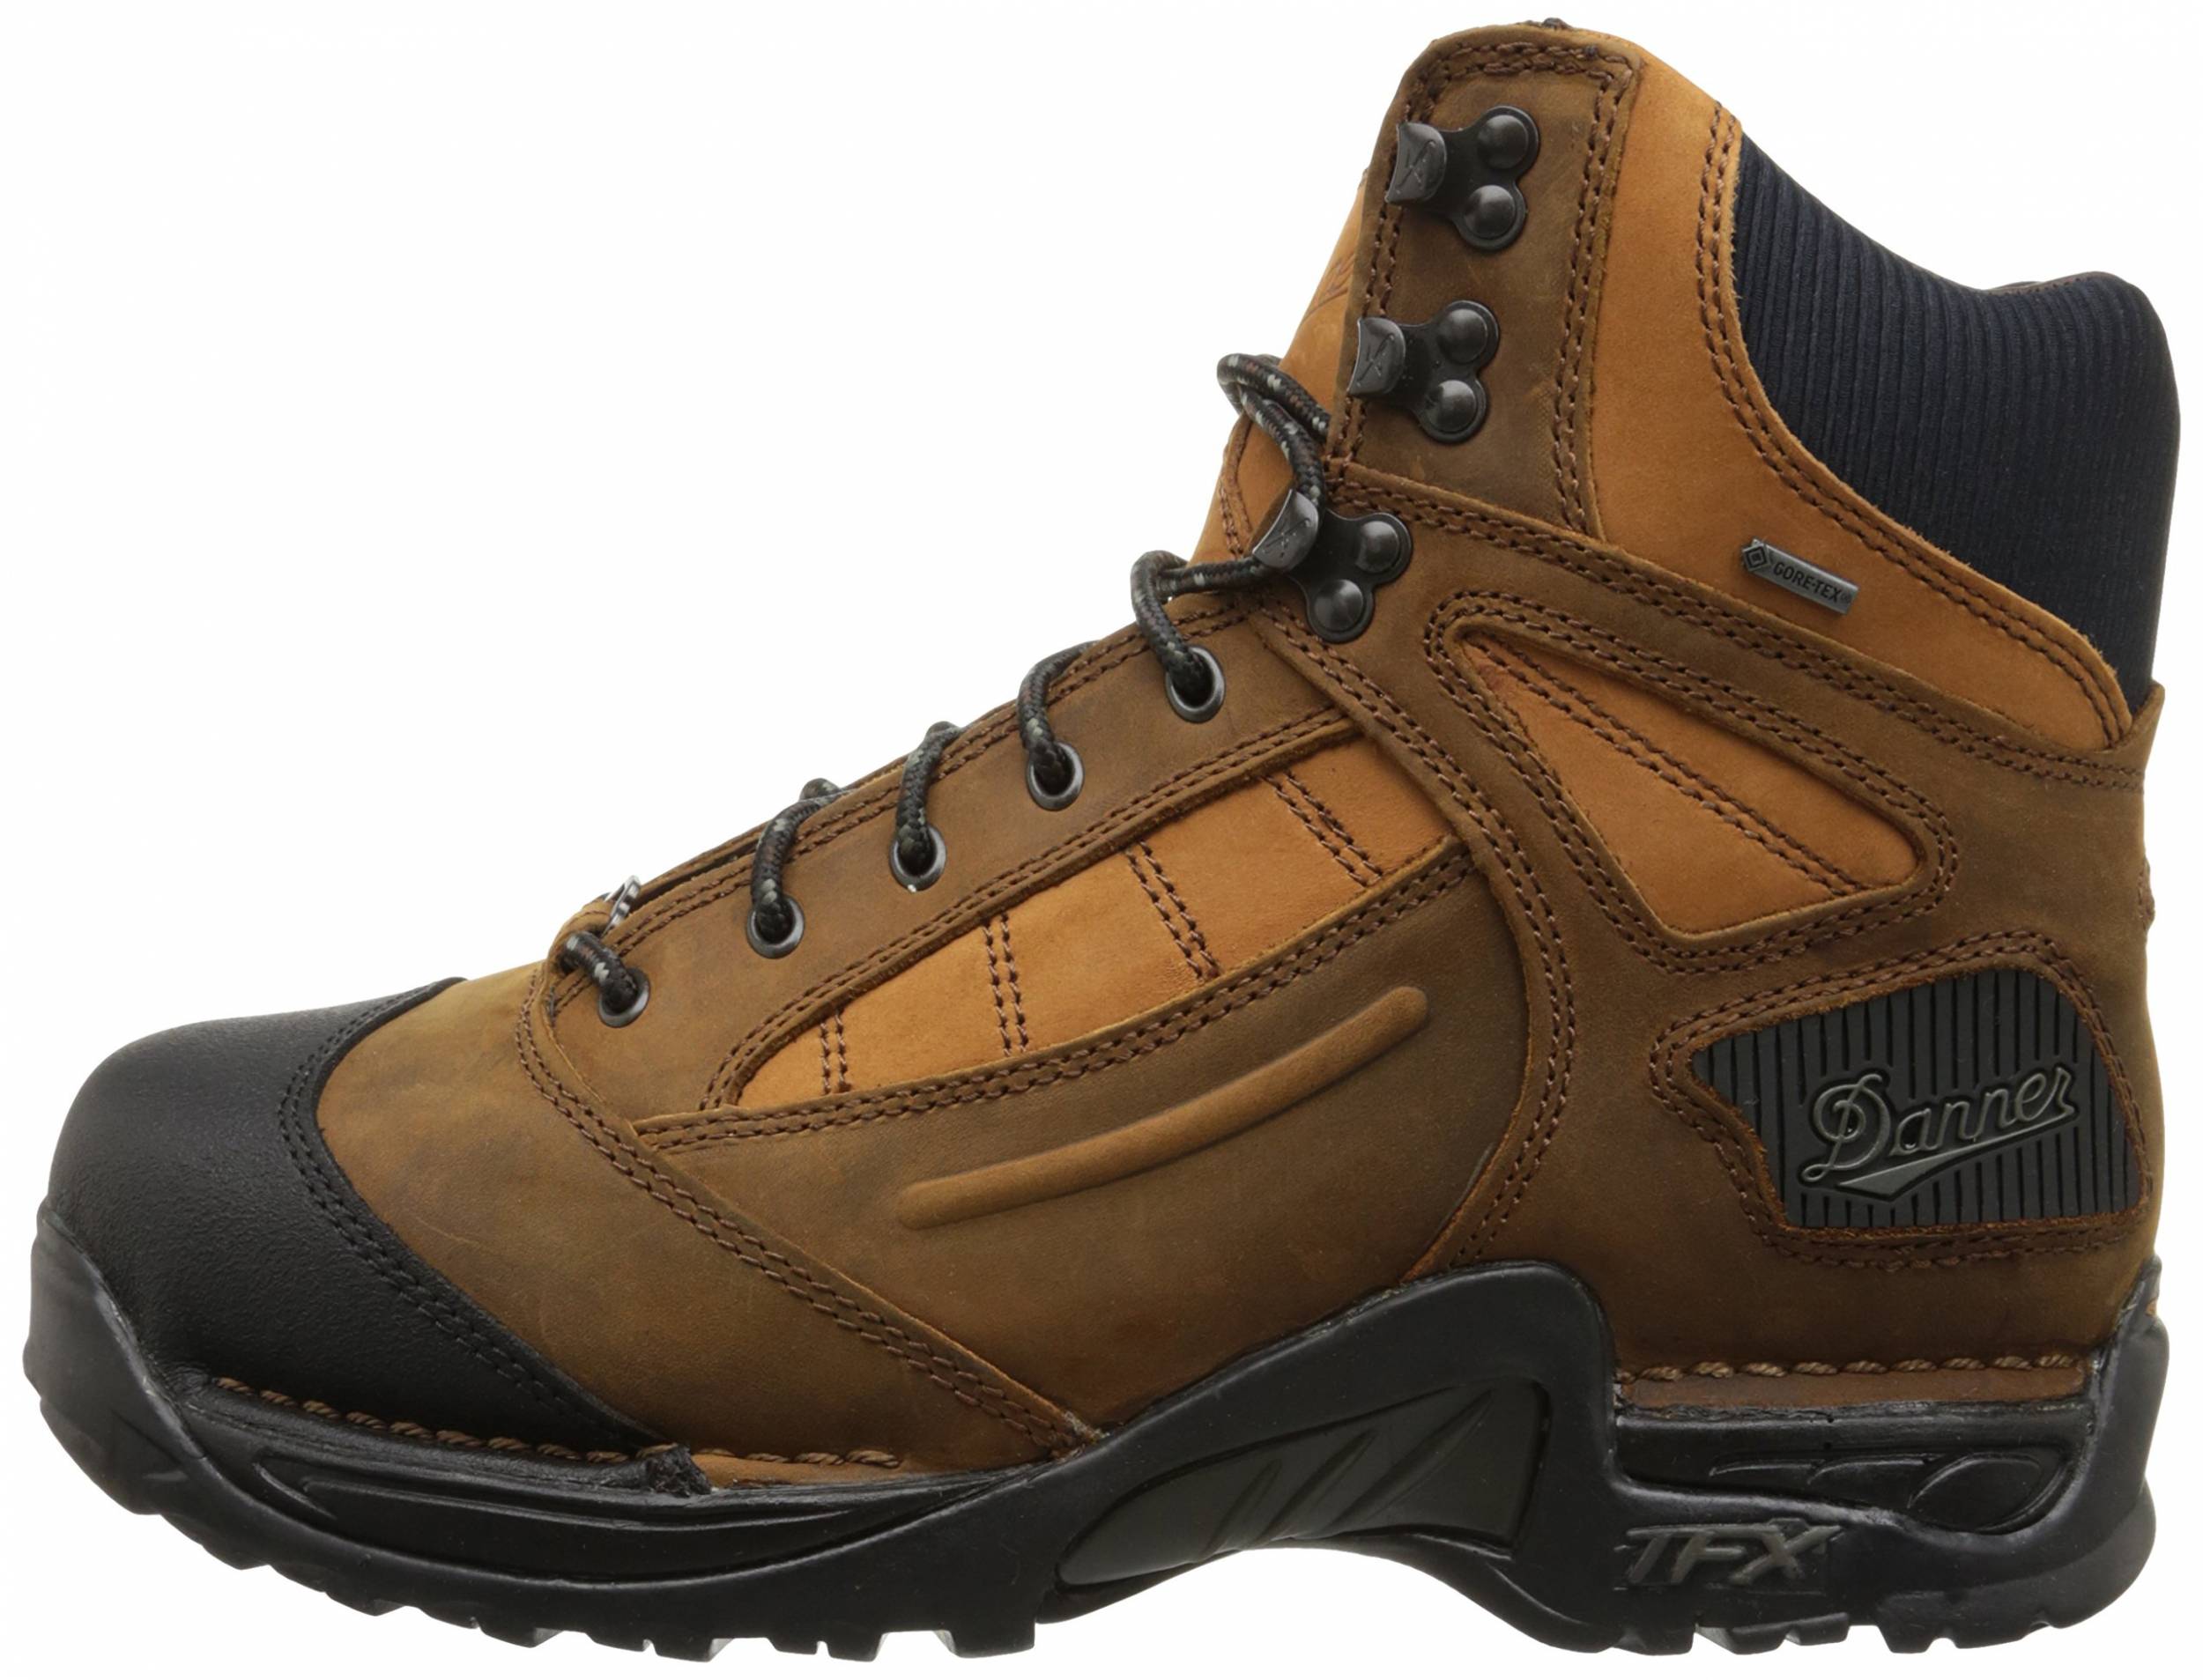 Only $180 + Review of Danner Instigator 